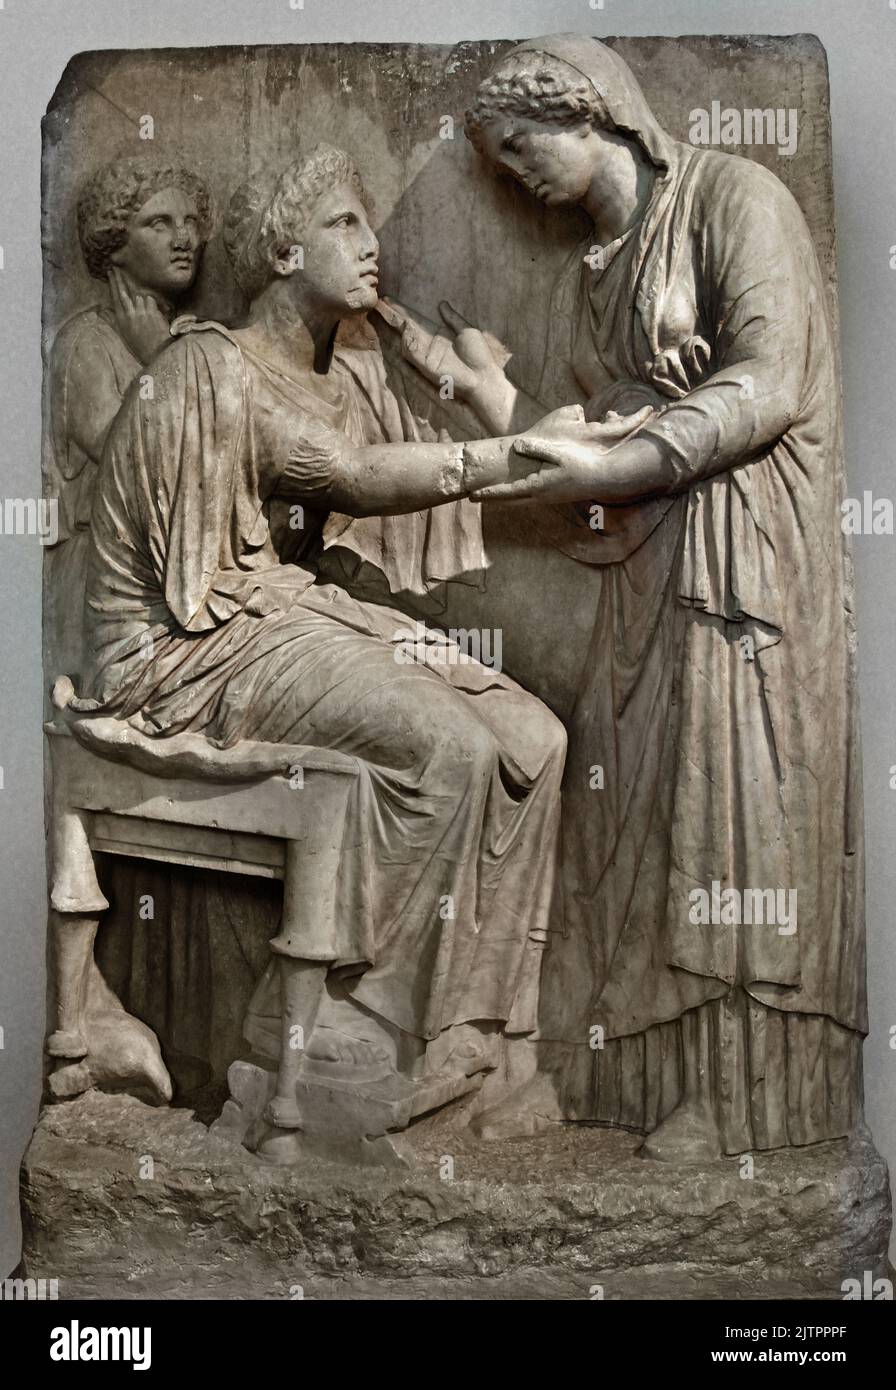 Funerary Stele of Farewell 4th cent. B.C. National Archaeological Museum in Athens,  Found, Omonoia Square, Athens. A woman seating on a stool extends her right hand to a standing relative, who holds it tenderly at the wrist and raises her other hand in a gesture of speech, At the left stands a girl lost in reflection. A small partridge pecks at the ground beneath the dead woman’s seat, Stock Photo